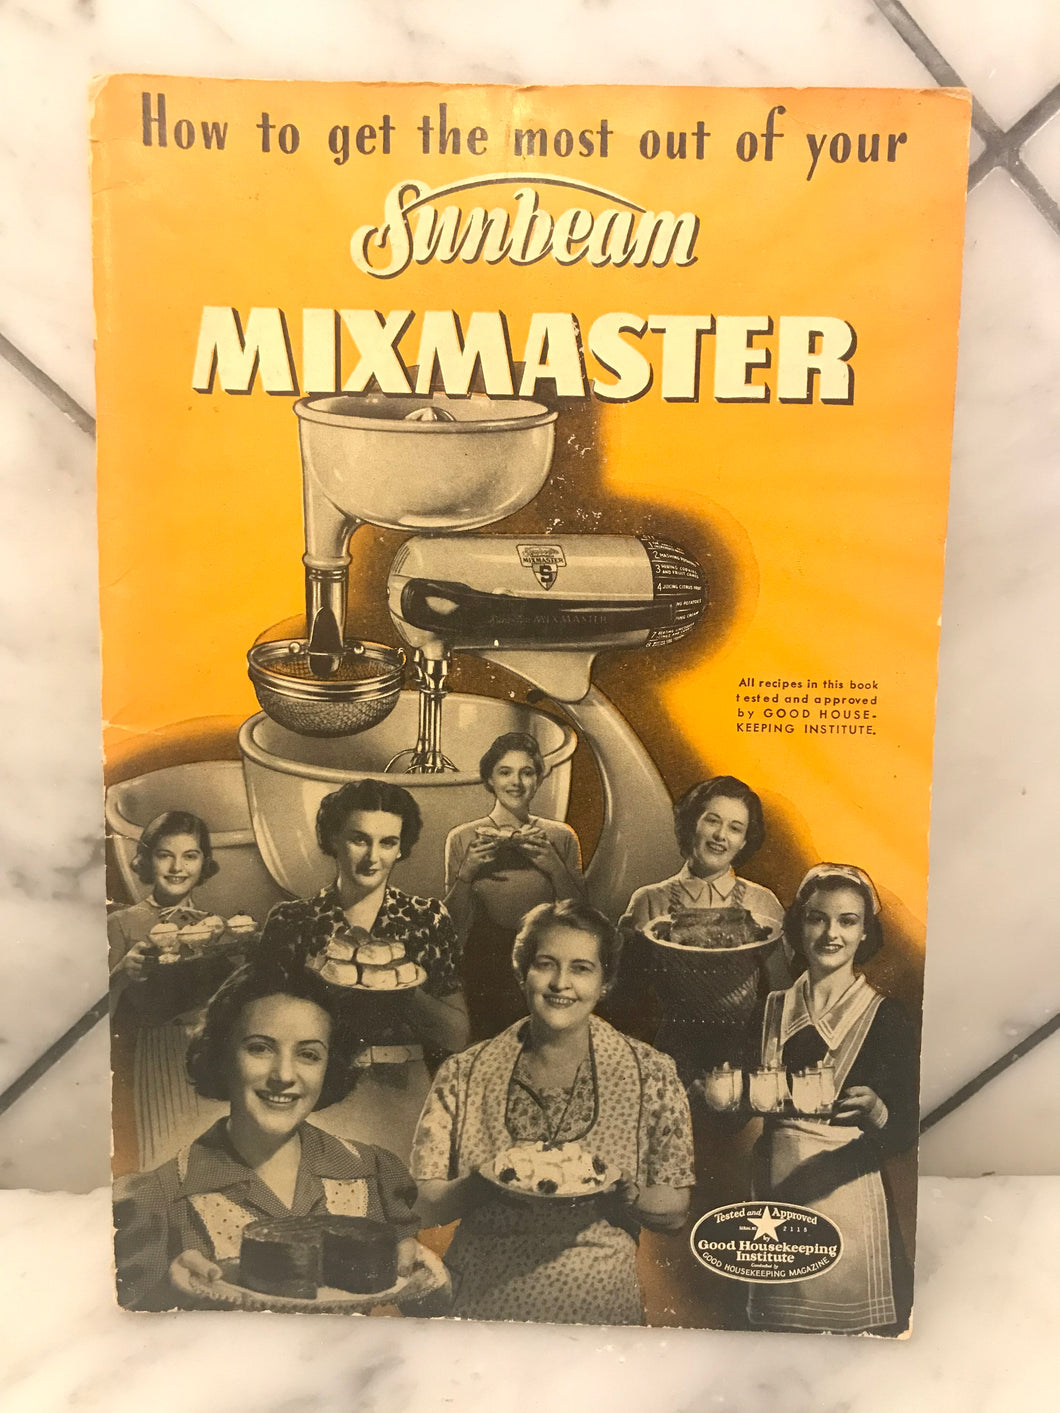 How to Get the Most Out of Your Sunbeam Mixmaster